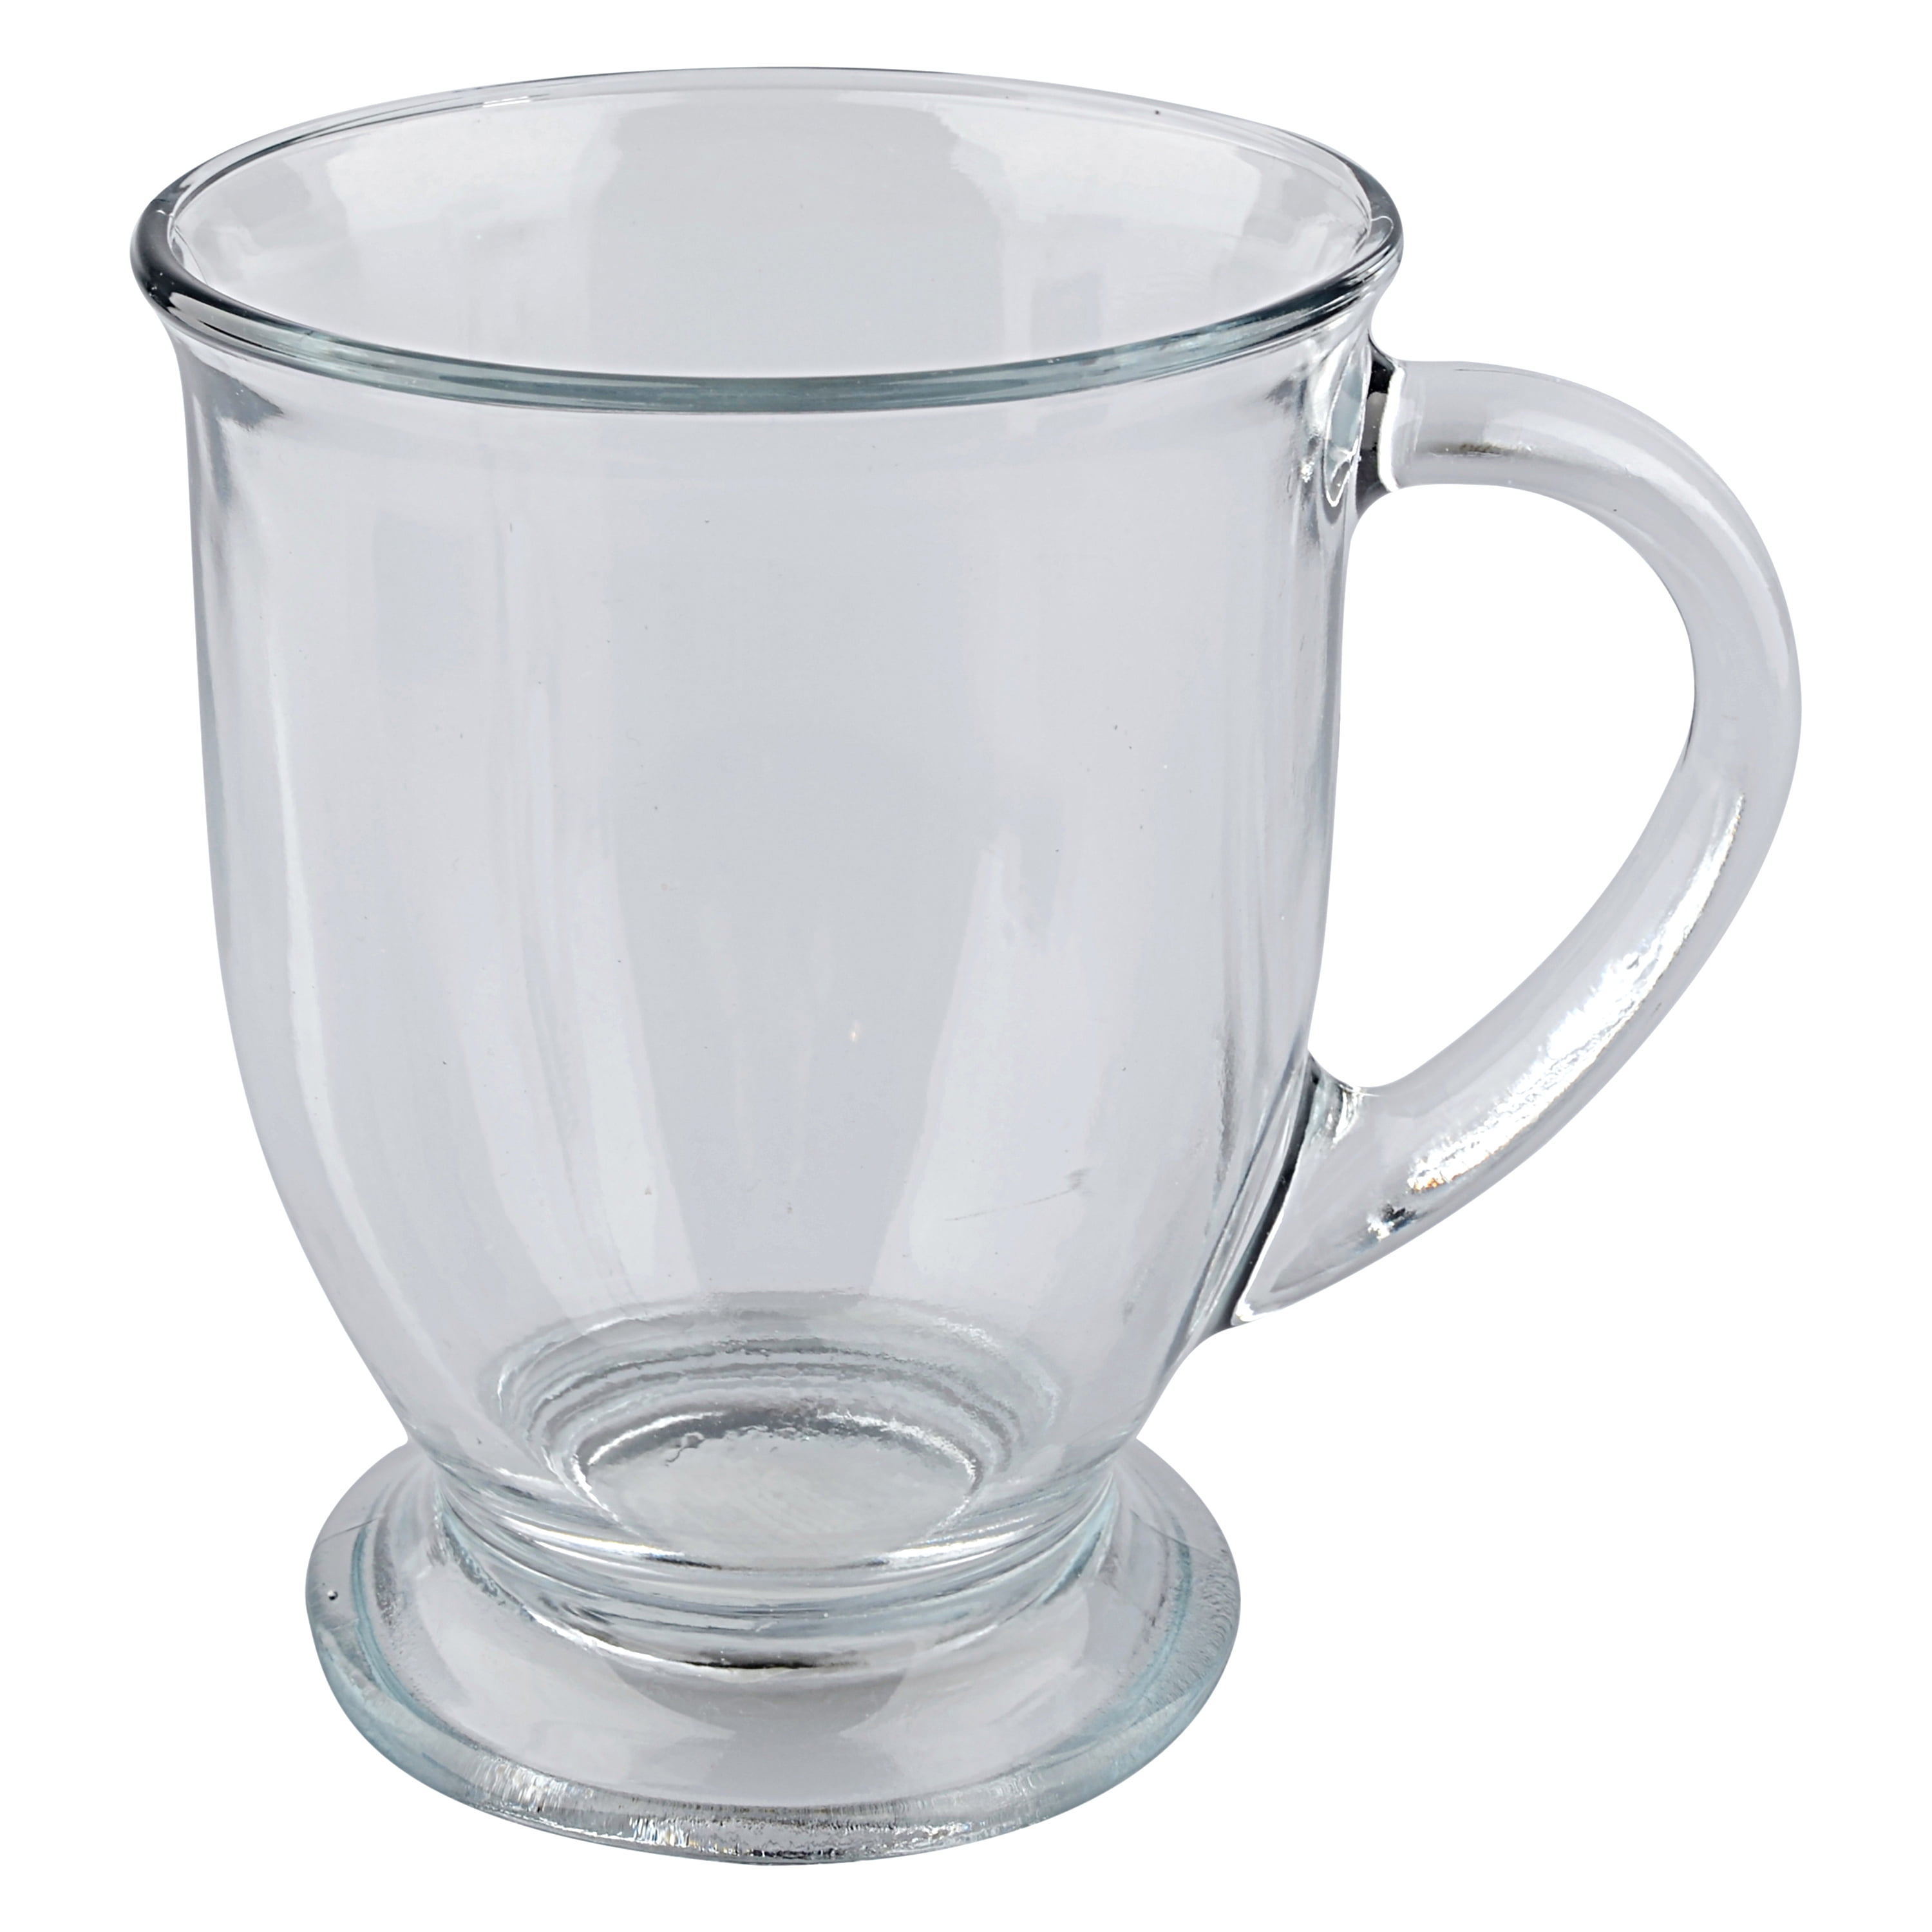  Anchor Hocking 16-oz Café Glass Coffee Mugs, Clear, Set of 6 :  Anchor Hocking: Home & Kitchen